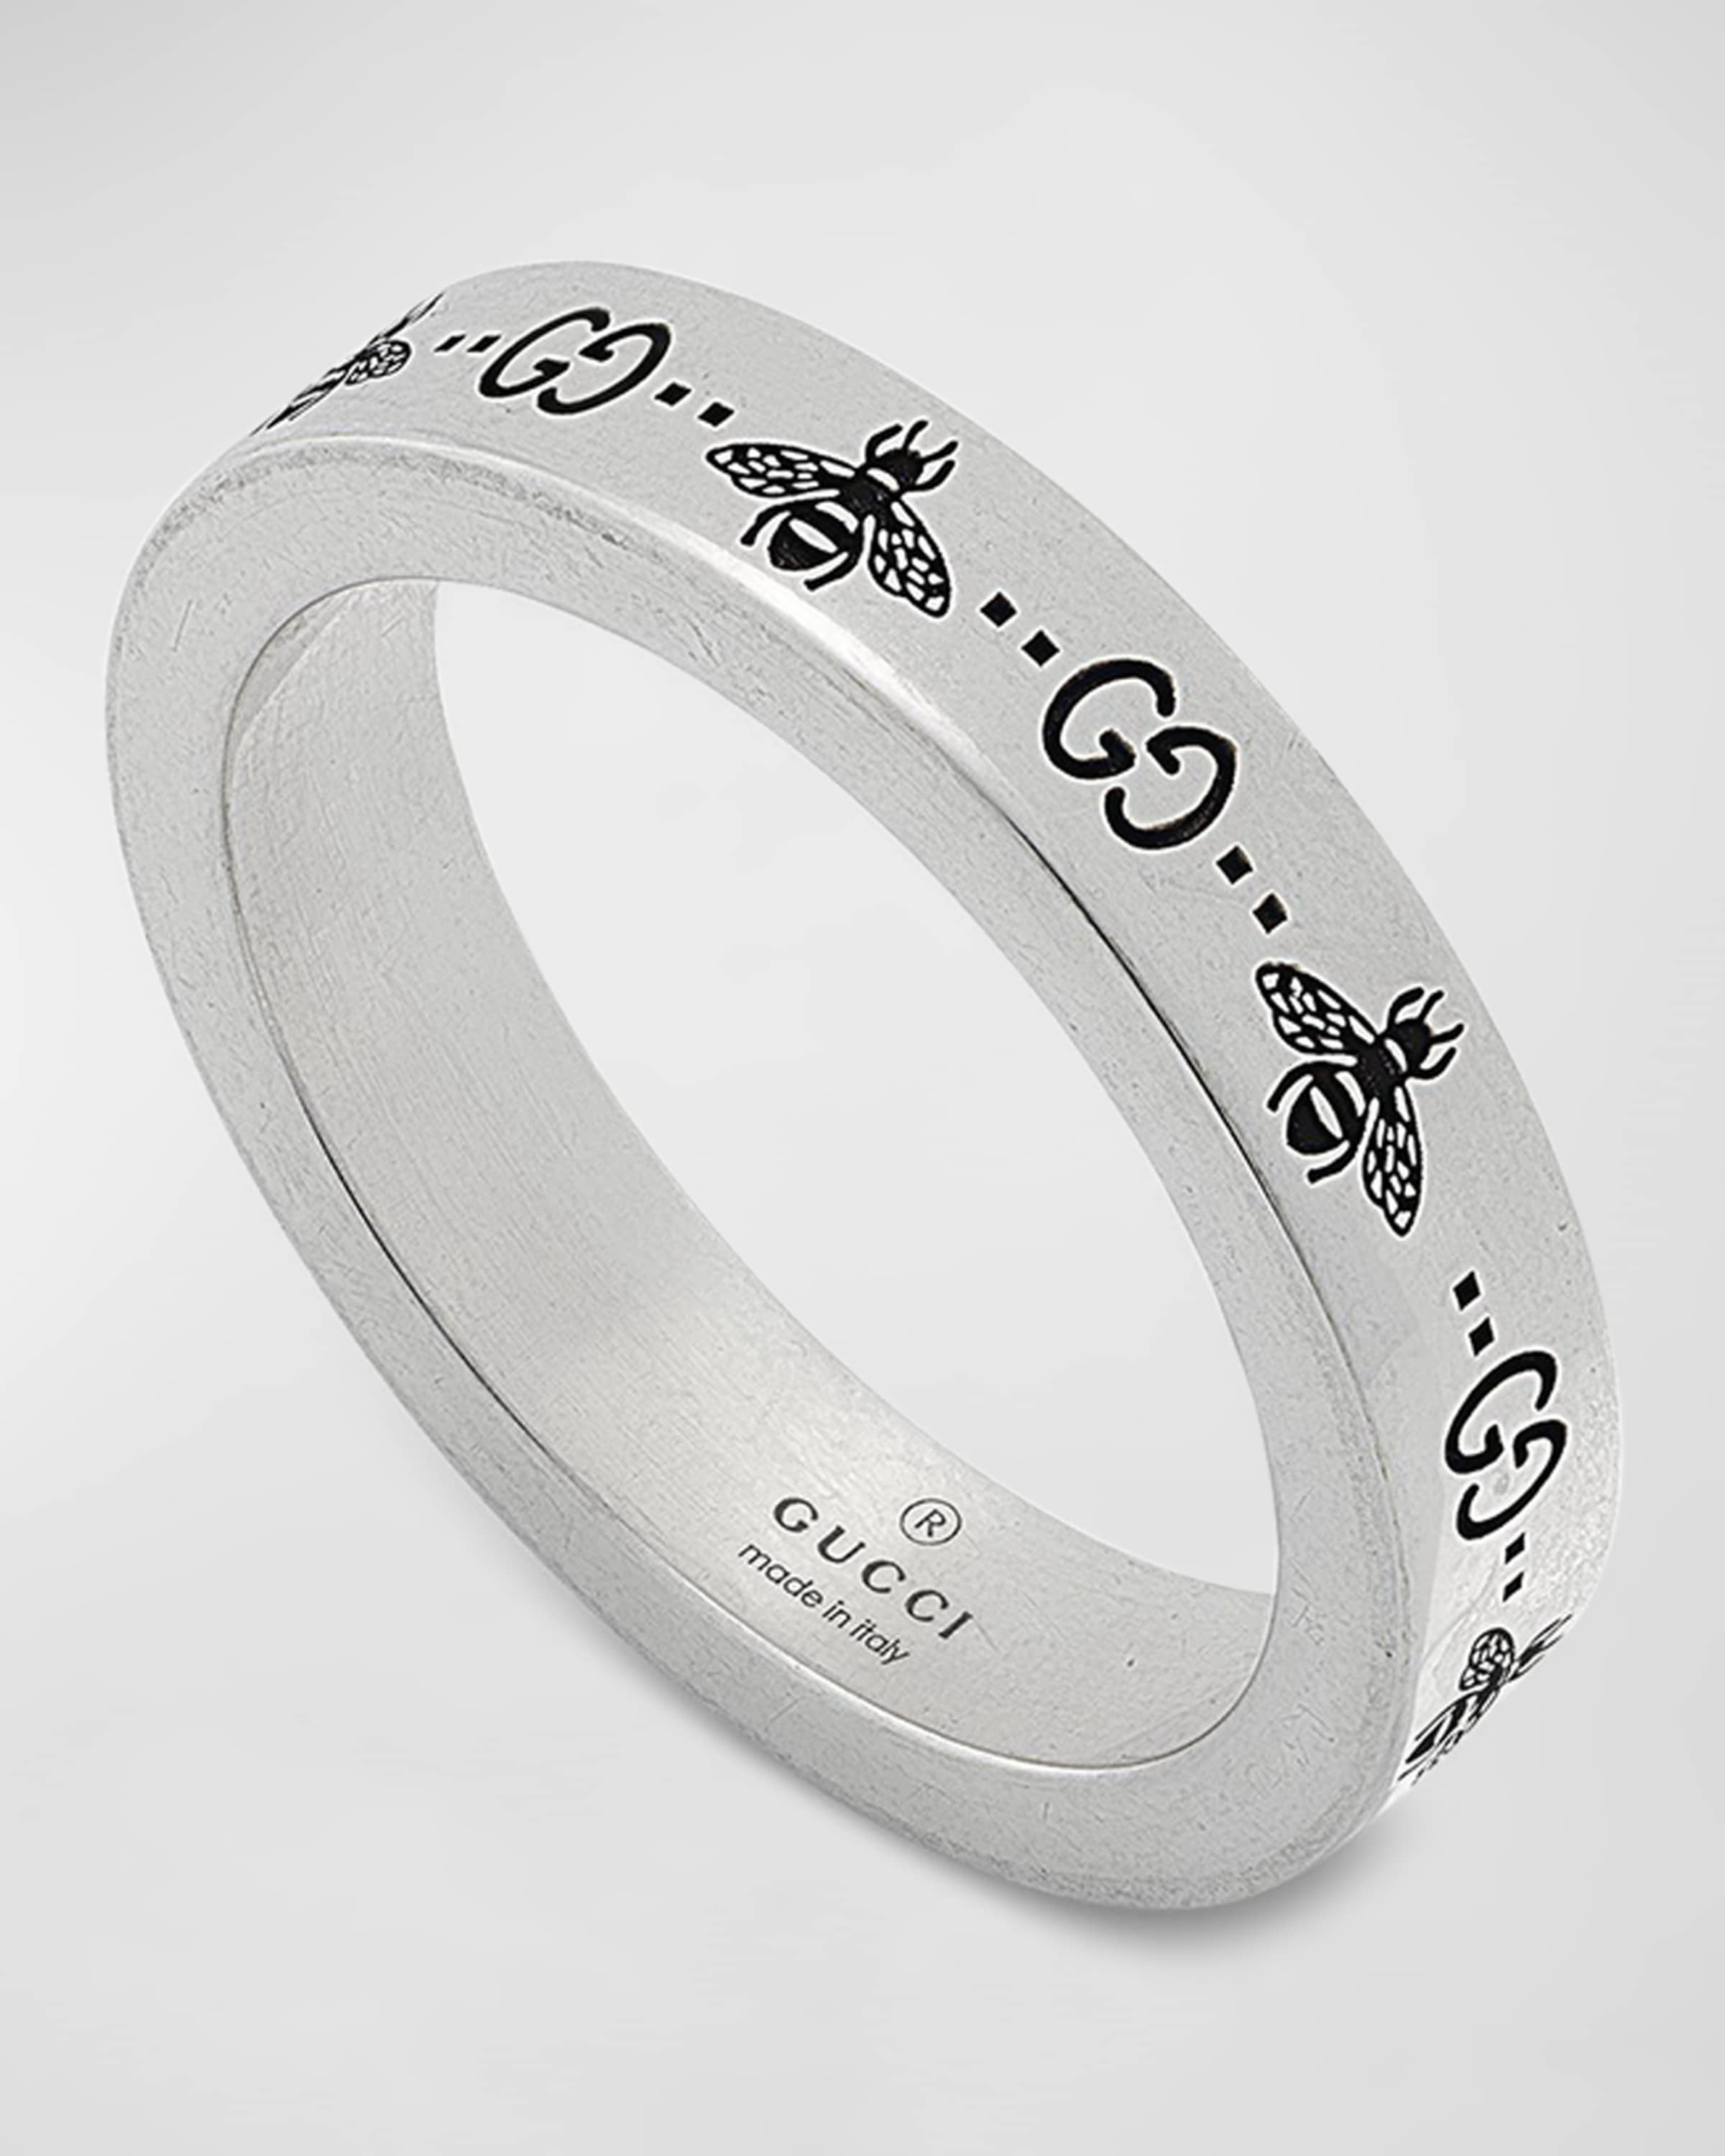 Men's GG and Bee Band Ring, 4mm - 1